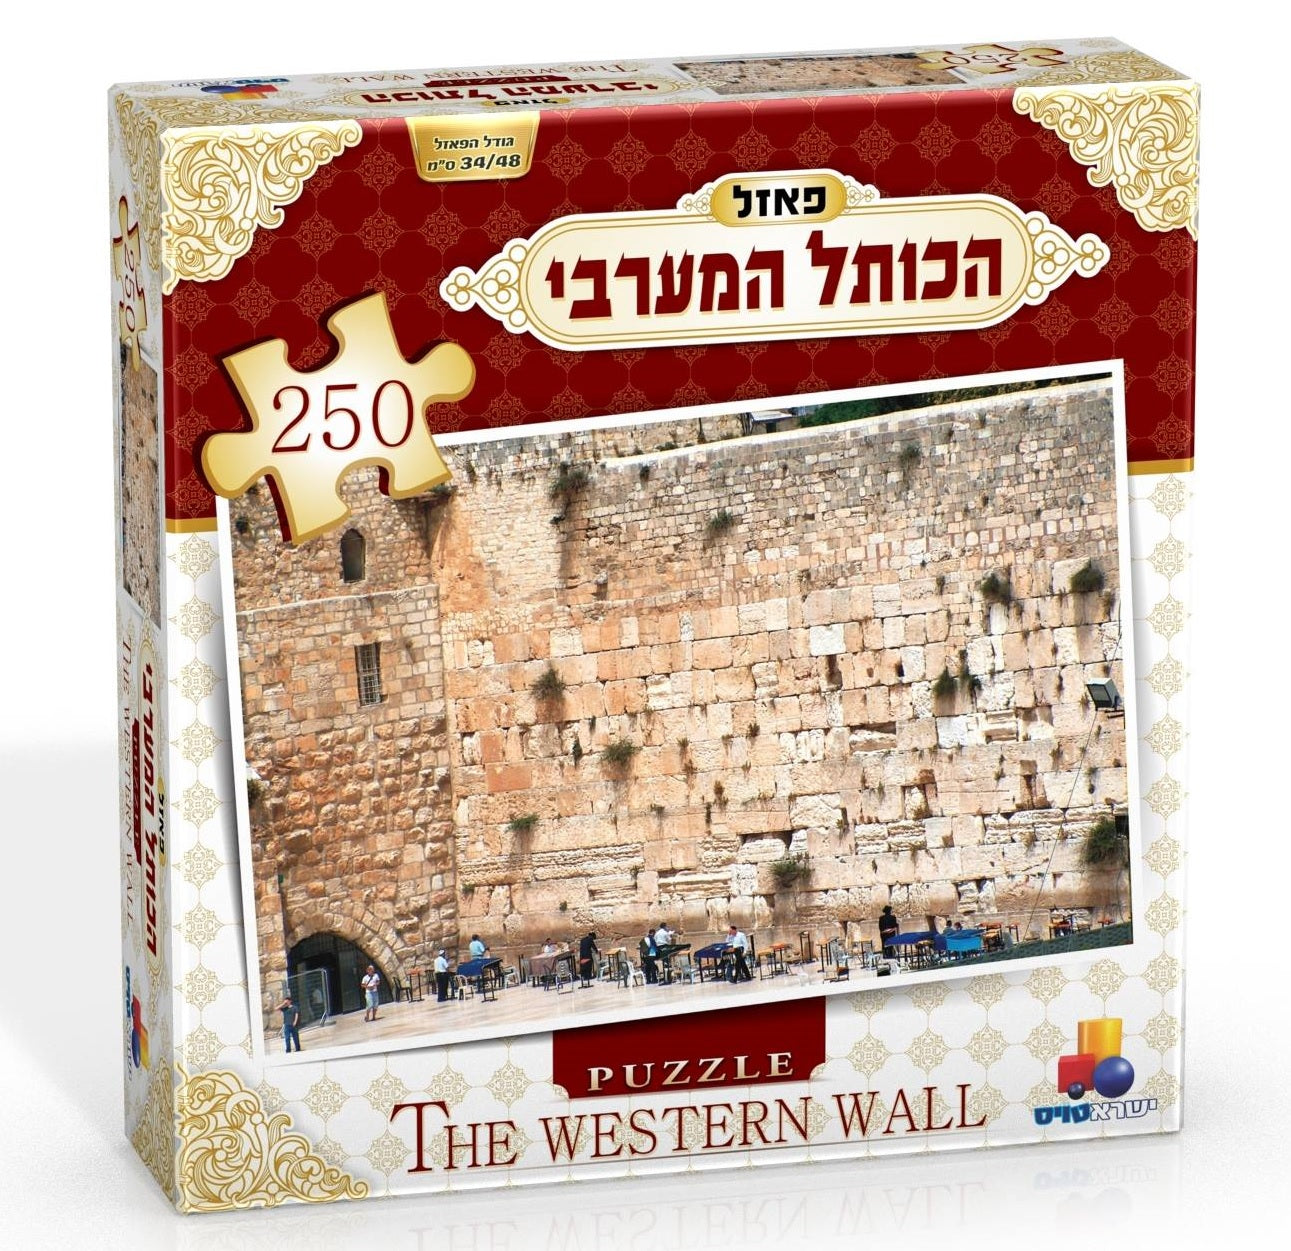 The Western Wall Puzzle - 250 Piece